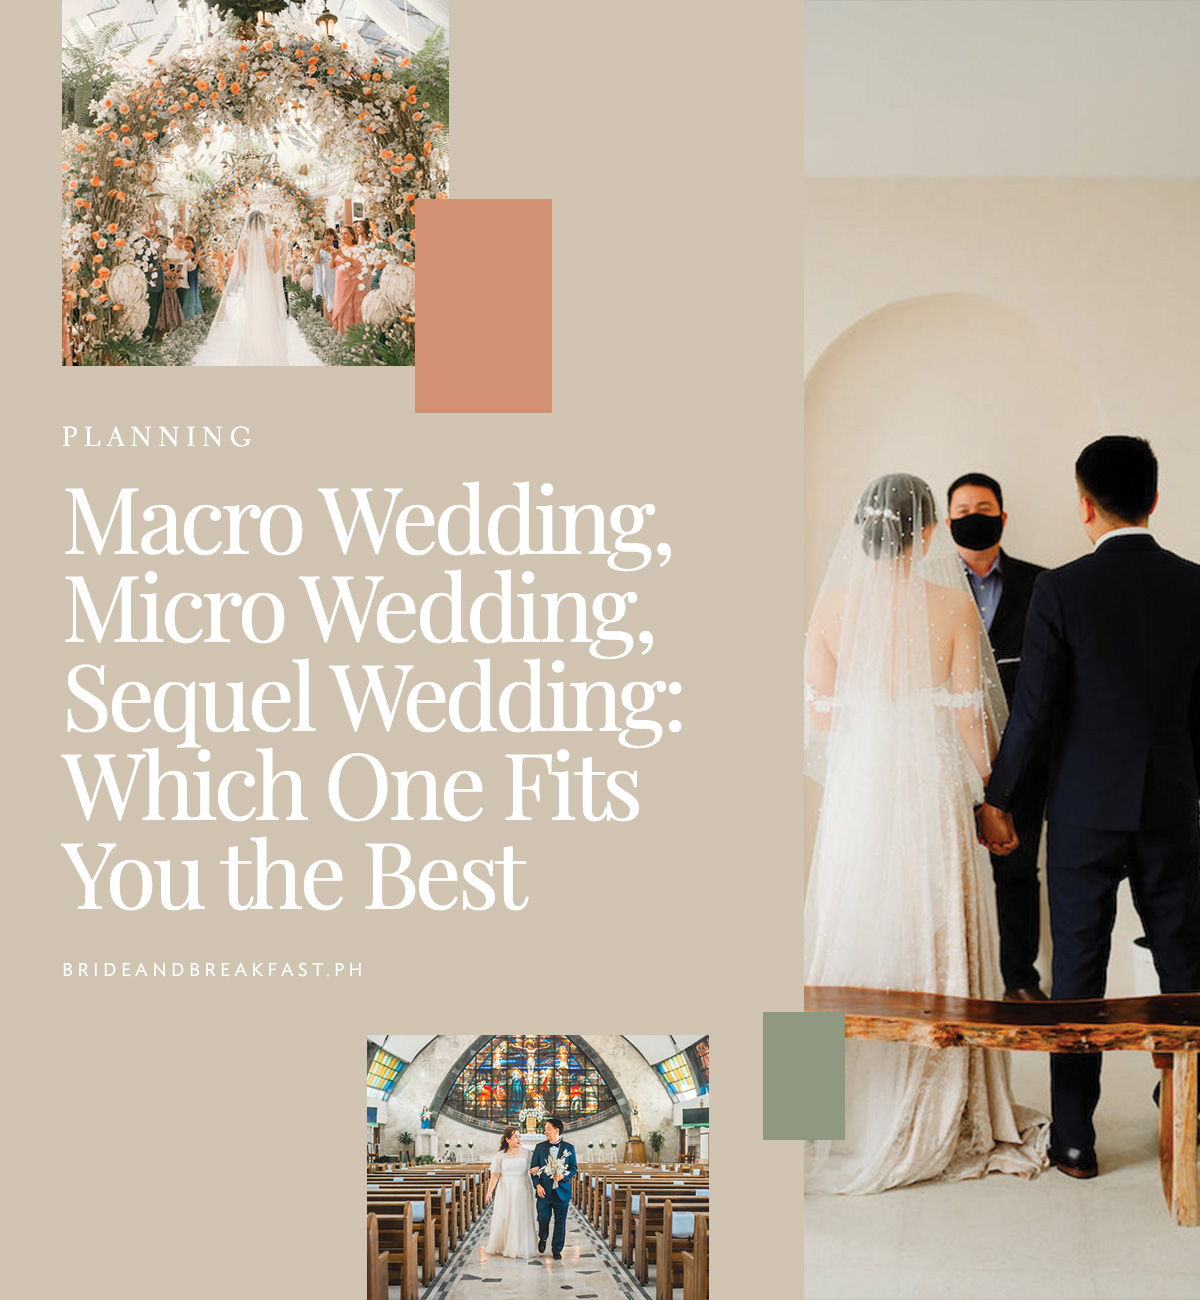 Macro Wedding, Micro Wedding, Sequel Wedding: Which One Fits You the Best